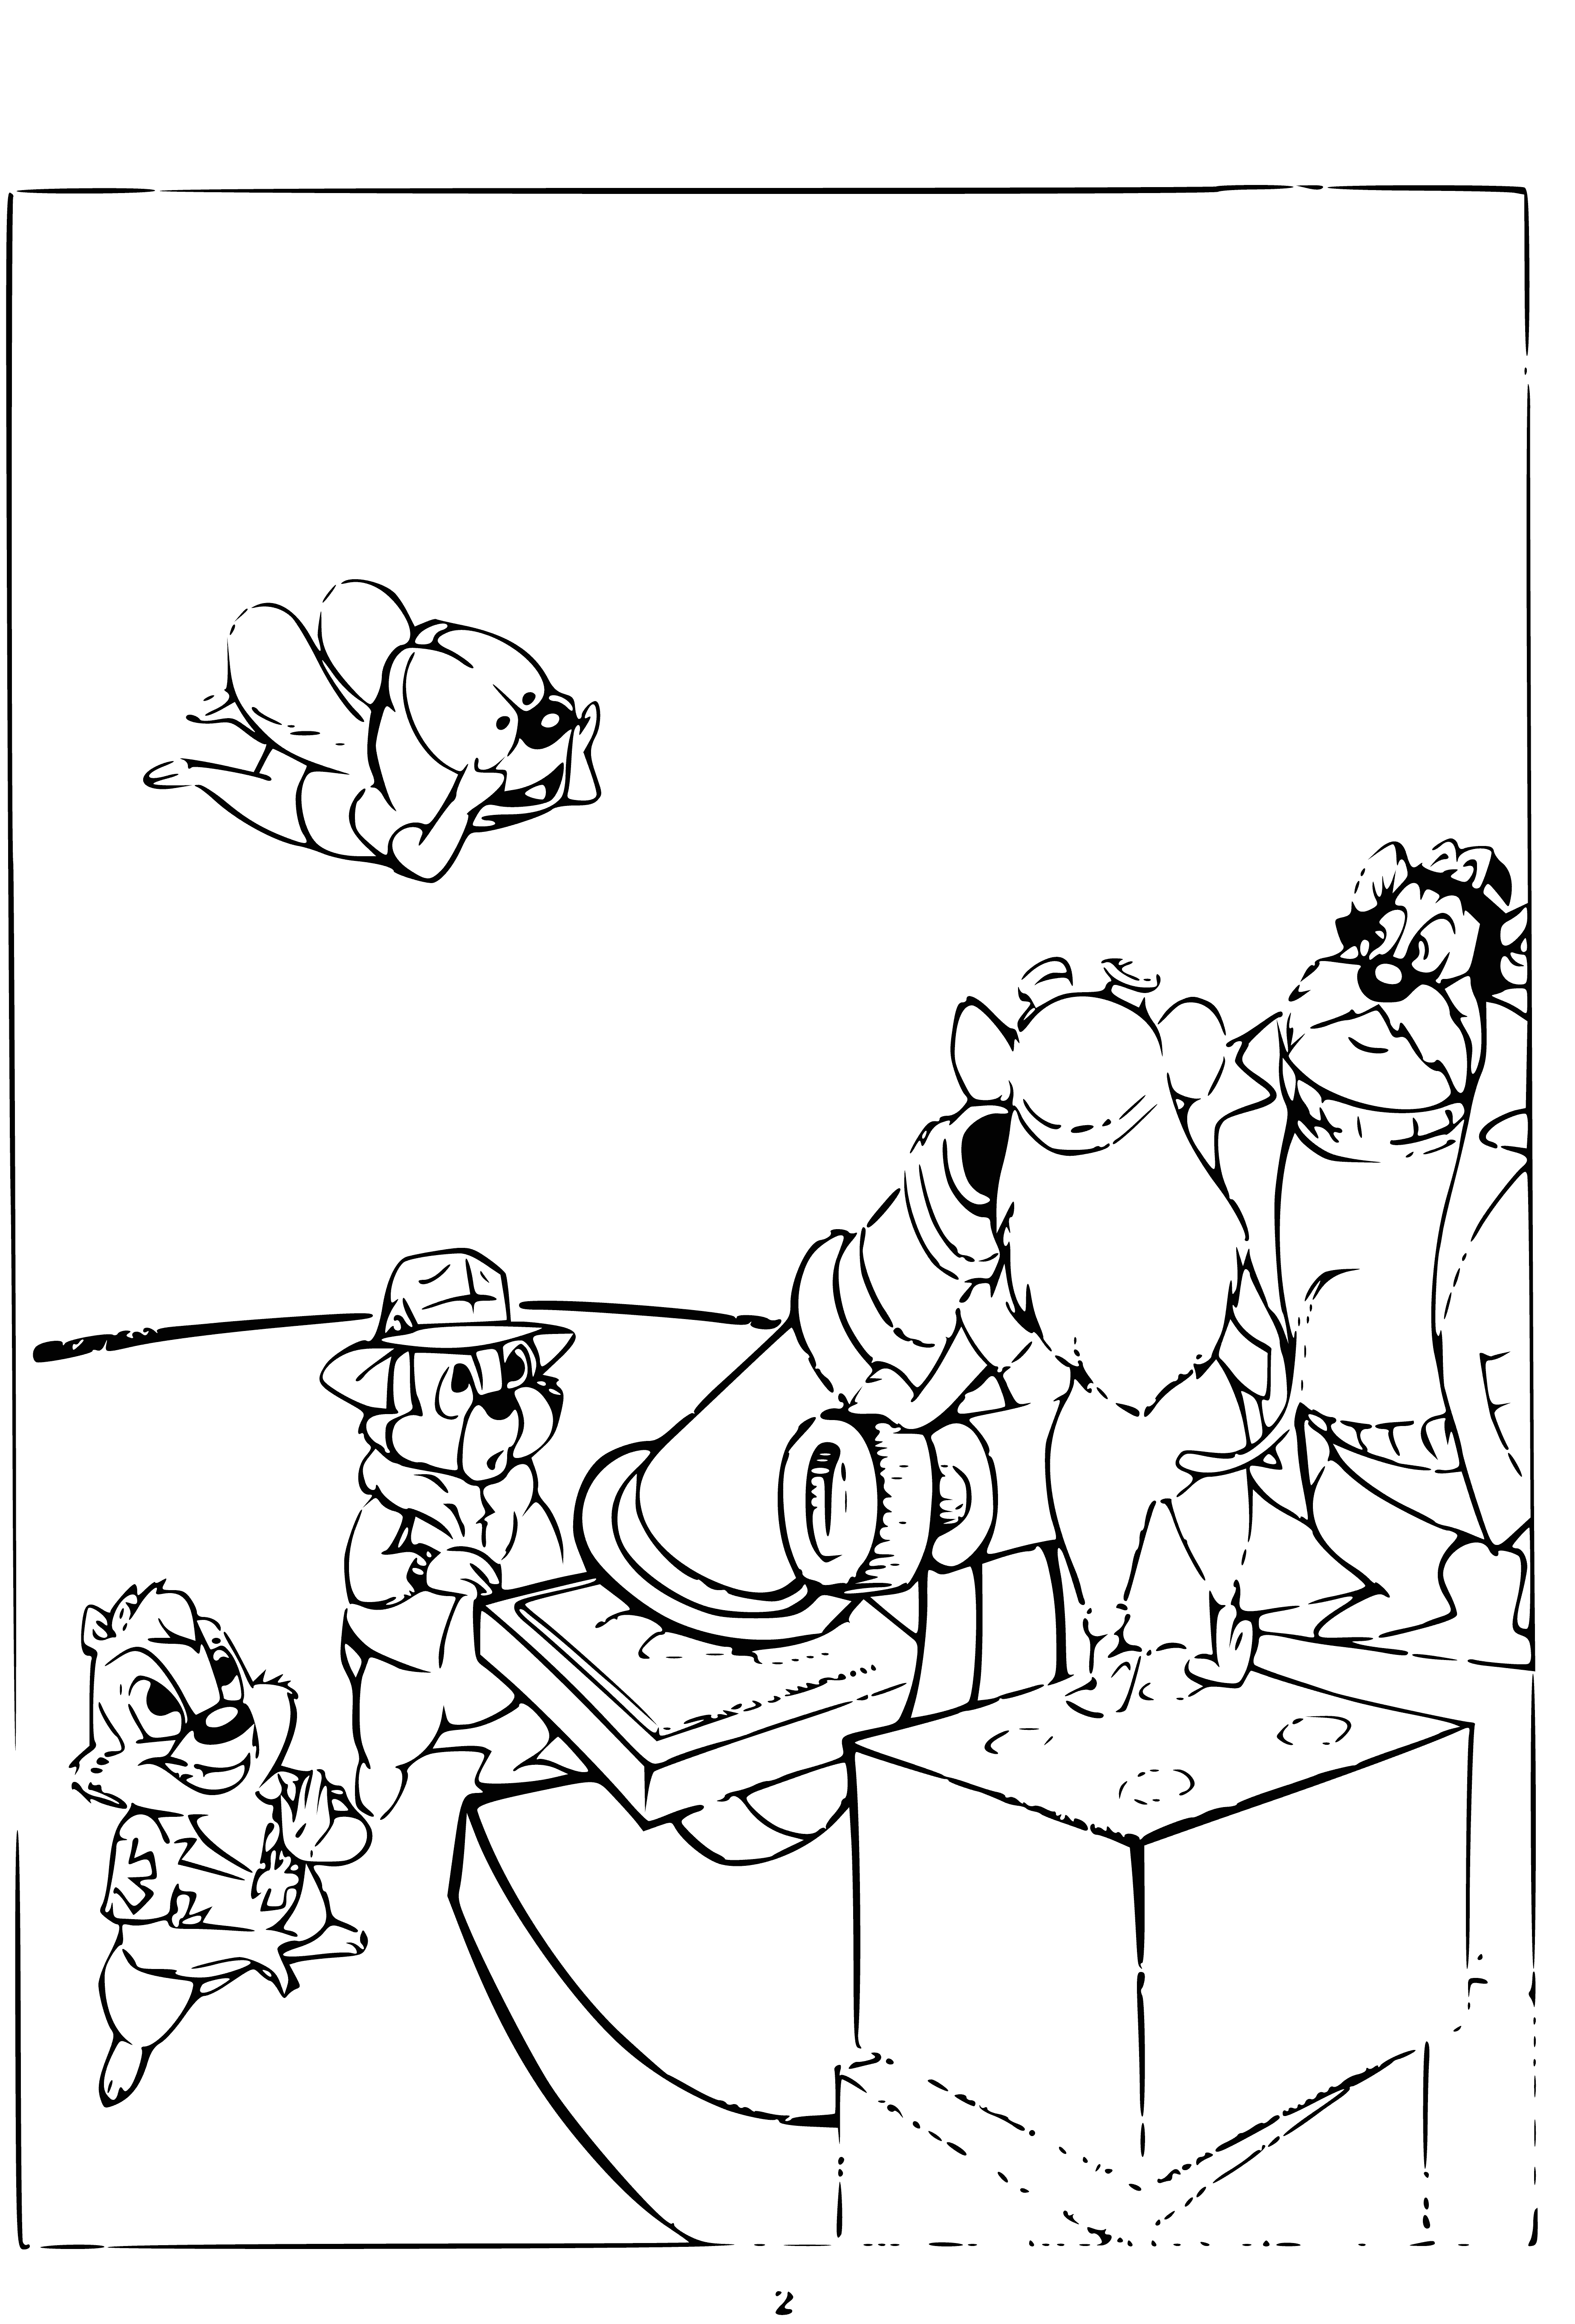 The whole team at the microscope coloring page